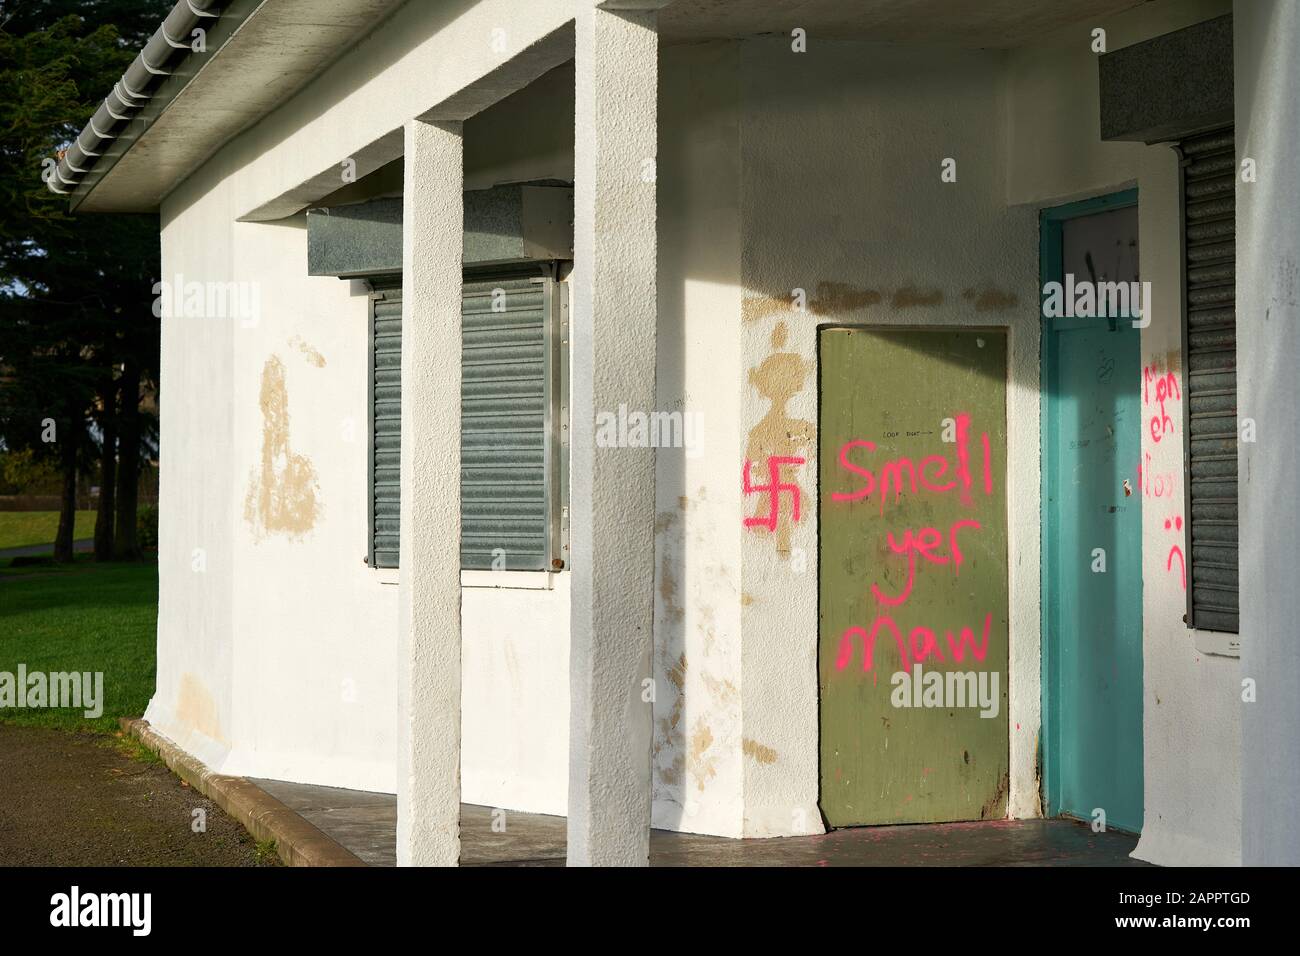 Cooper park Pavilion, Elgin, Moray, UK. 2020. UK. This is the Swastika and other graffiti sprayed on the walls of the pavilion within very popular park. Credit: JASPERIMAGE/Alamy Live News